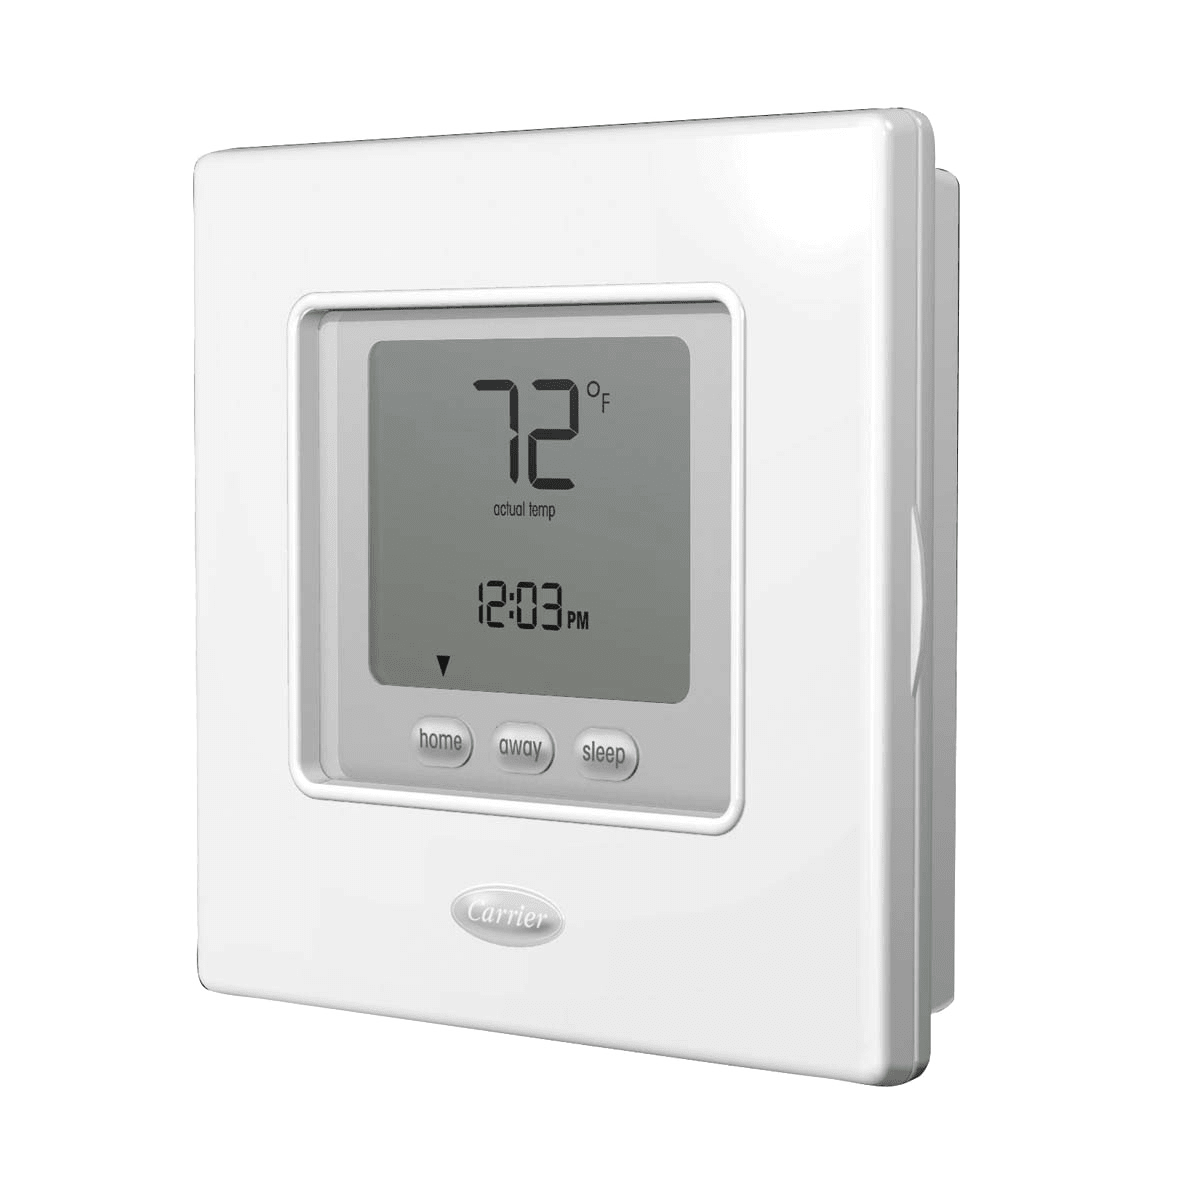 comfort-programmable-thermostat-TC-PAC01